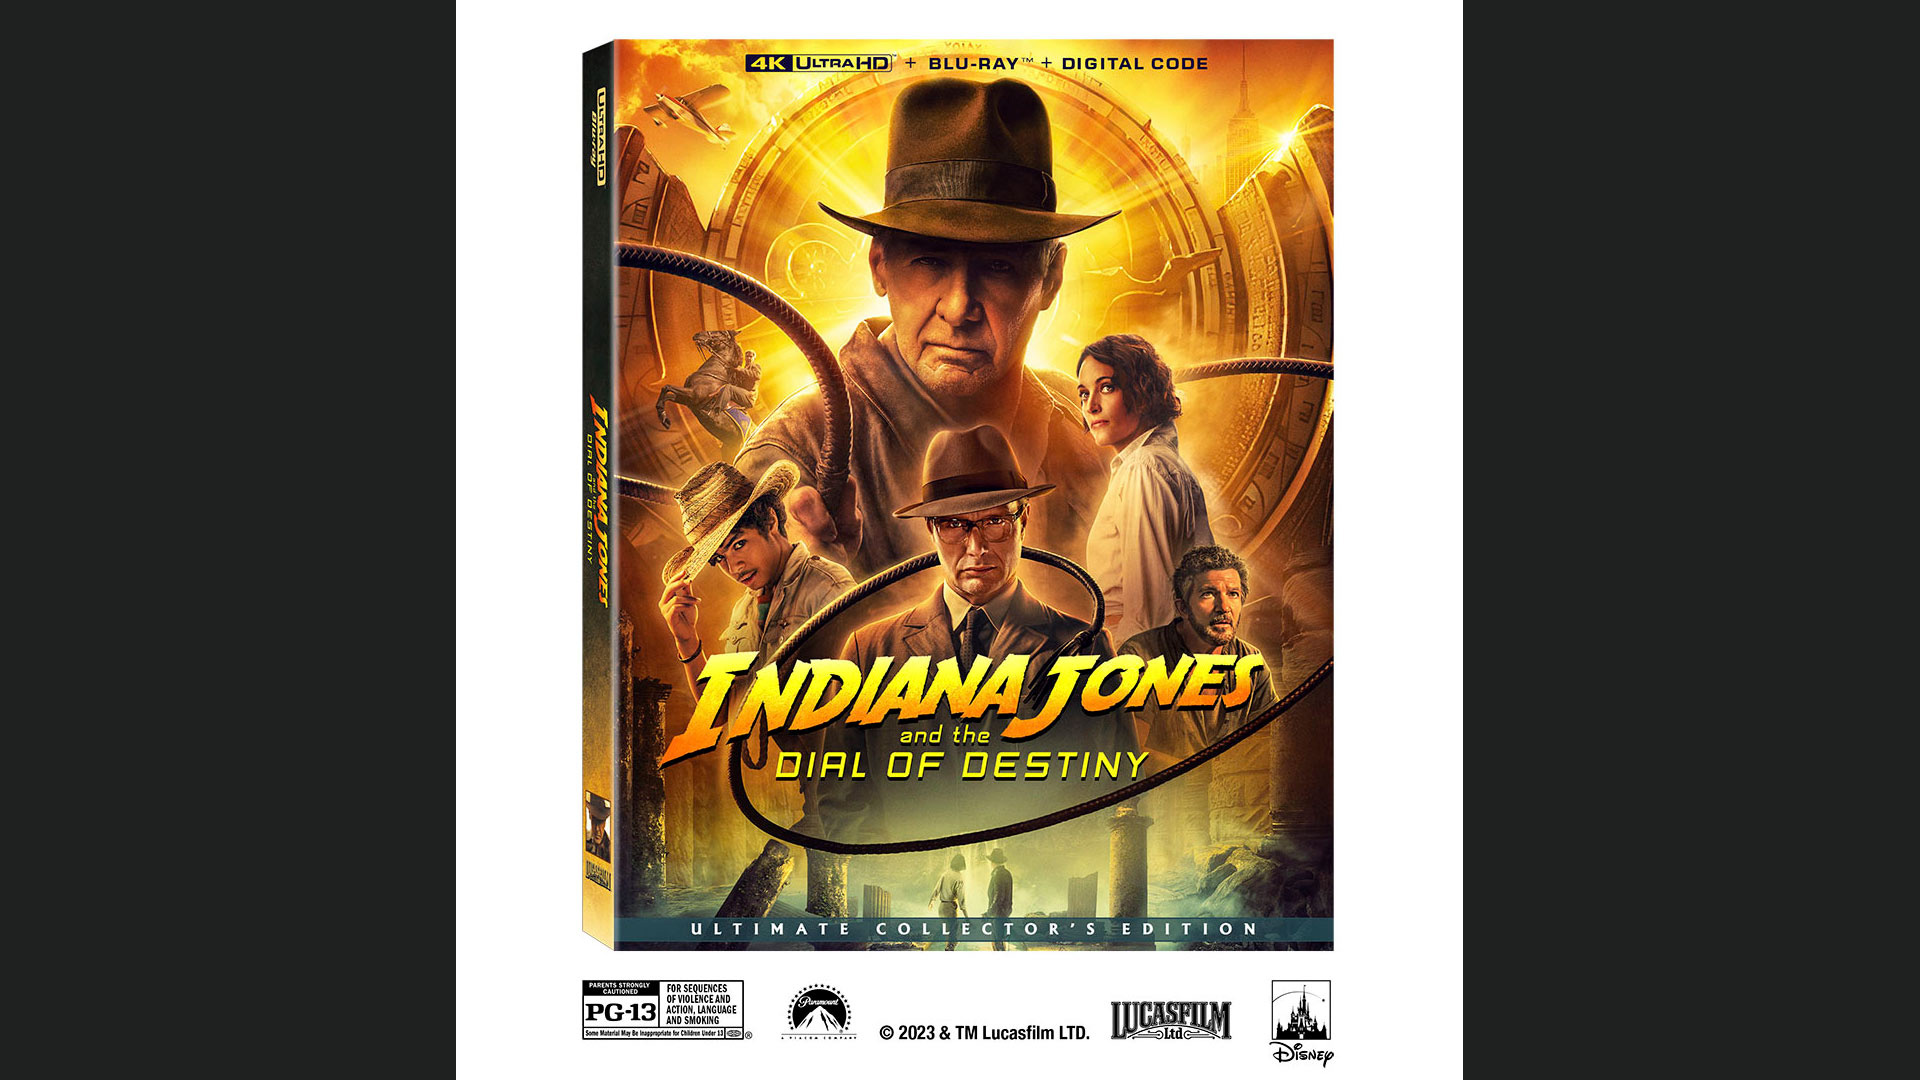 Indiana Jones and the Dial of Destiny Digital code and 4K